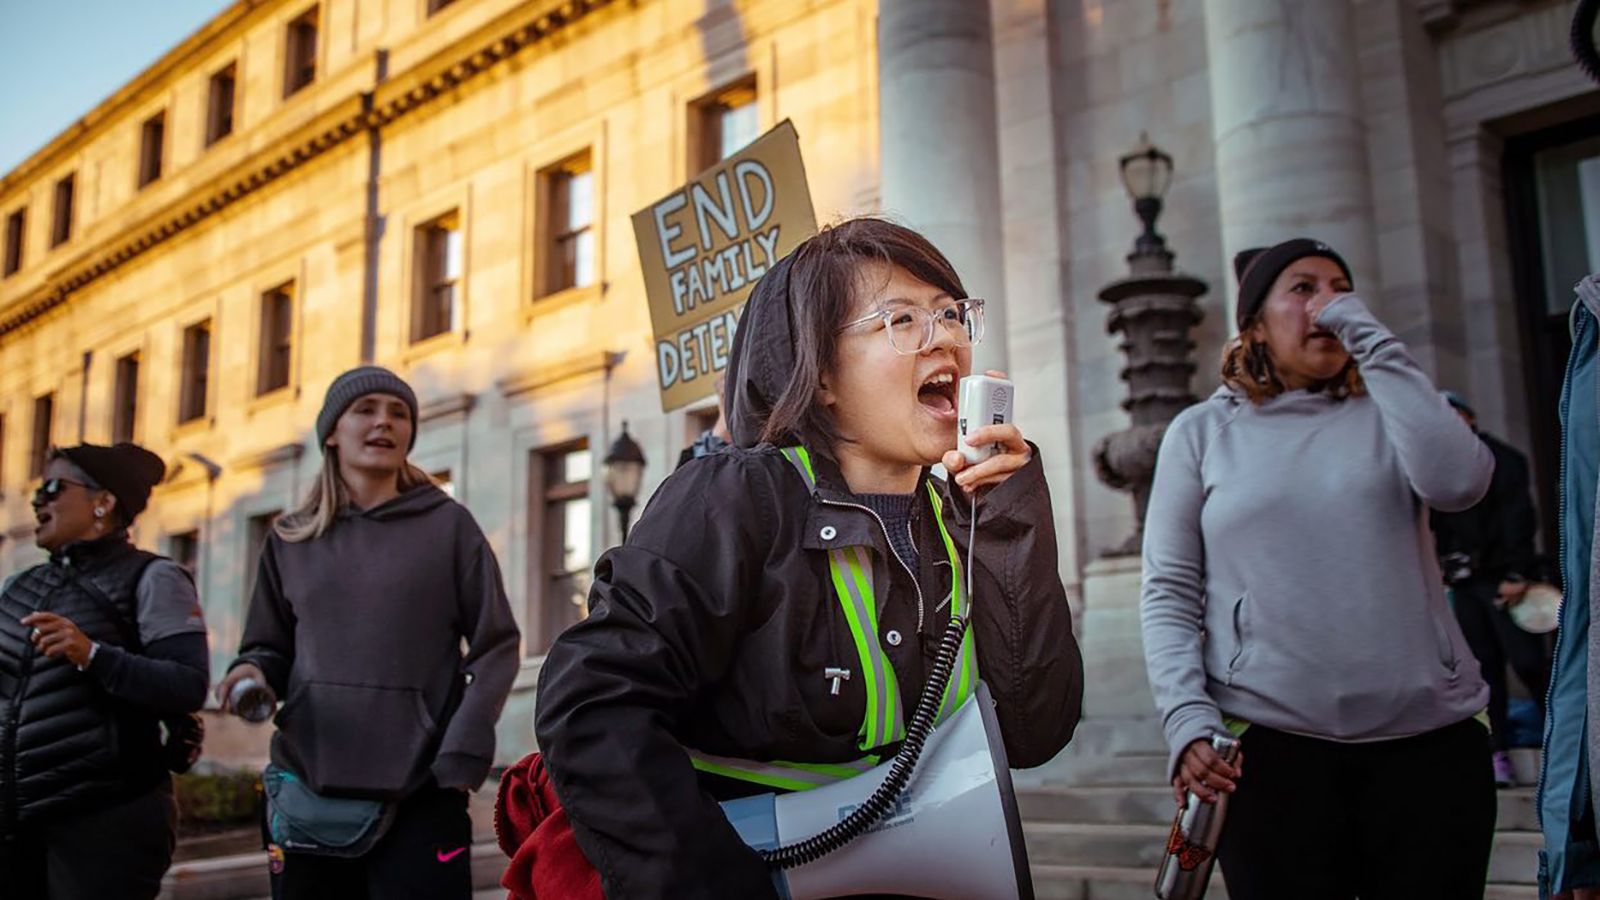 Carolina Fung Feng, 30, leads protesters in a chant in Media, Pennsylvania. Fung Feng is among the DACA recipients who are suing the government over the administration's decision to end the program.